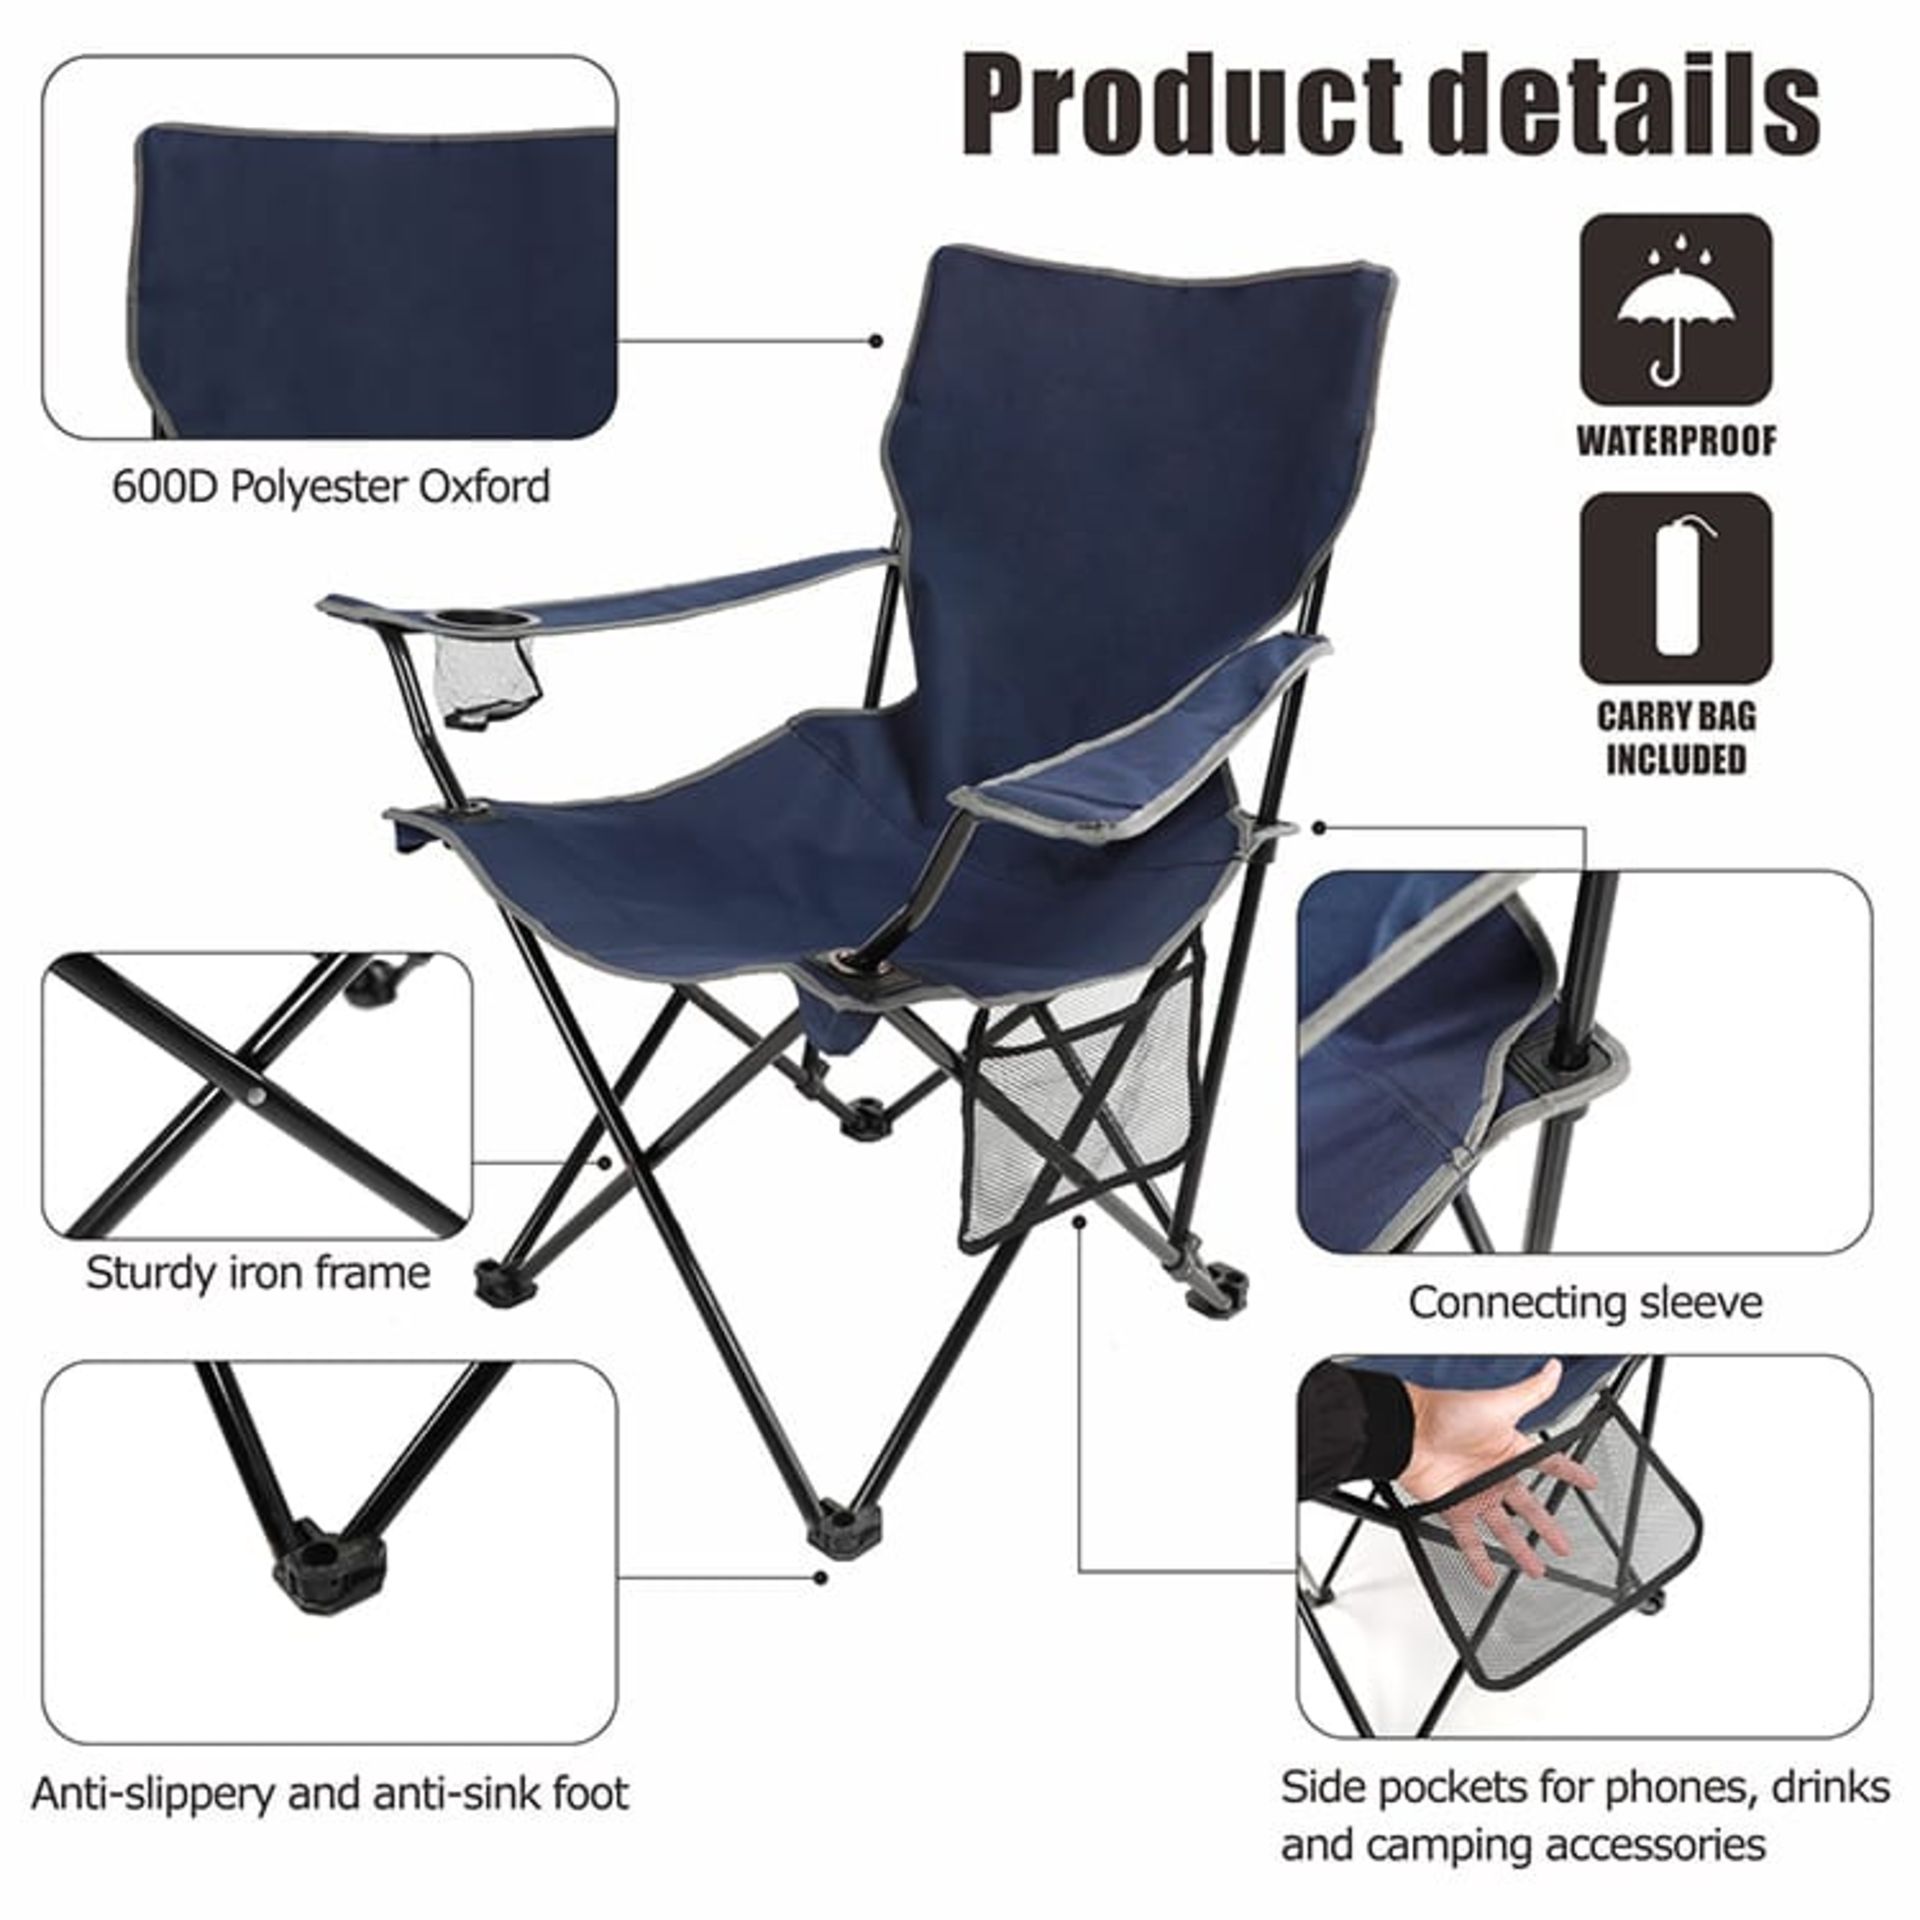 UNITS - RBSM CAMPING FOLDING CHAIRS W/ CARRYING BAGS - NAVY BLUE (NEW) (MSRP $75) - Image 2 of 4